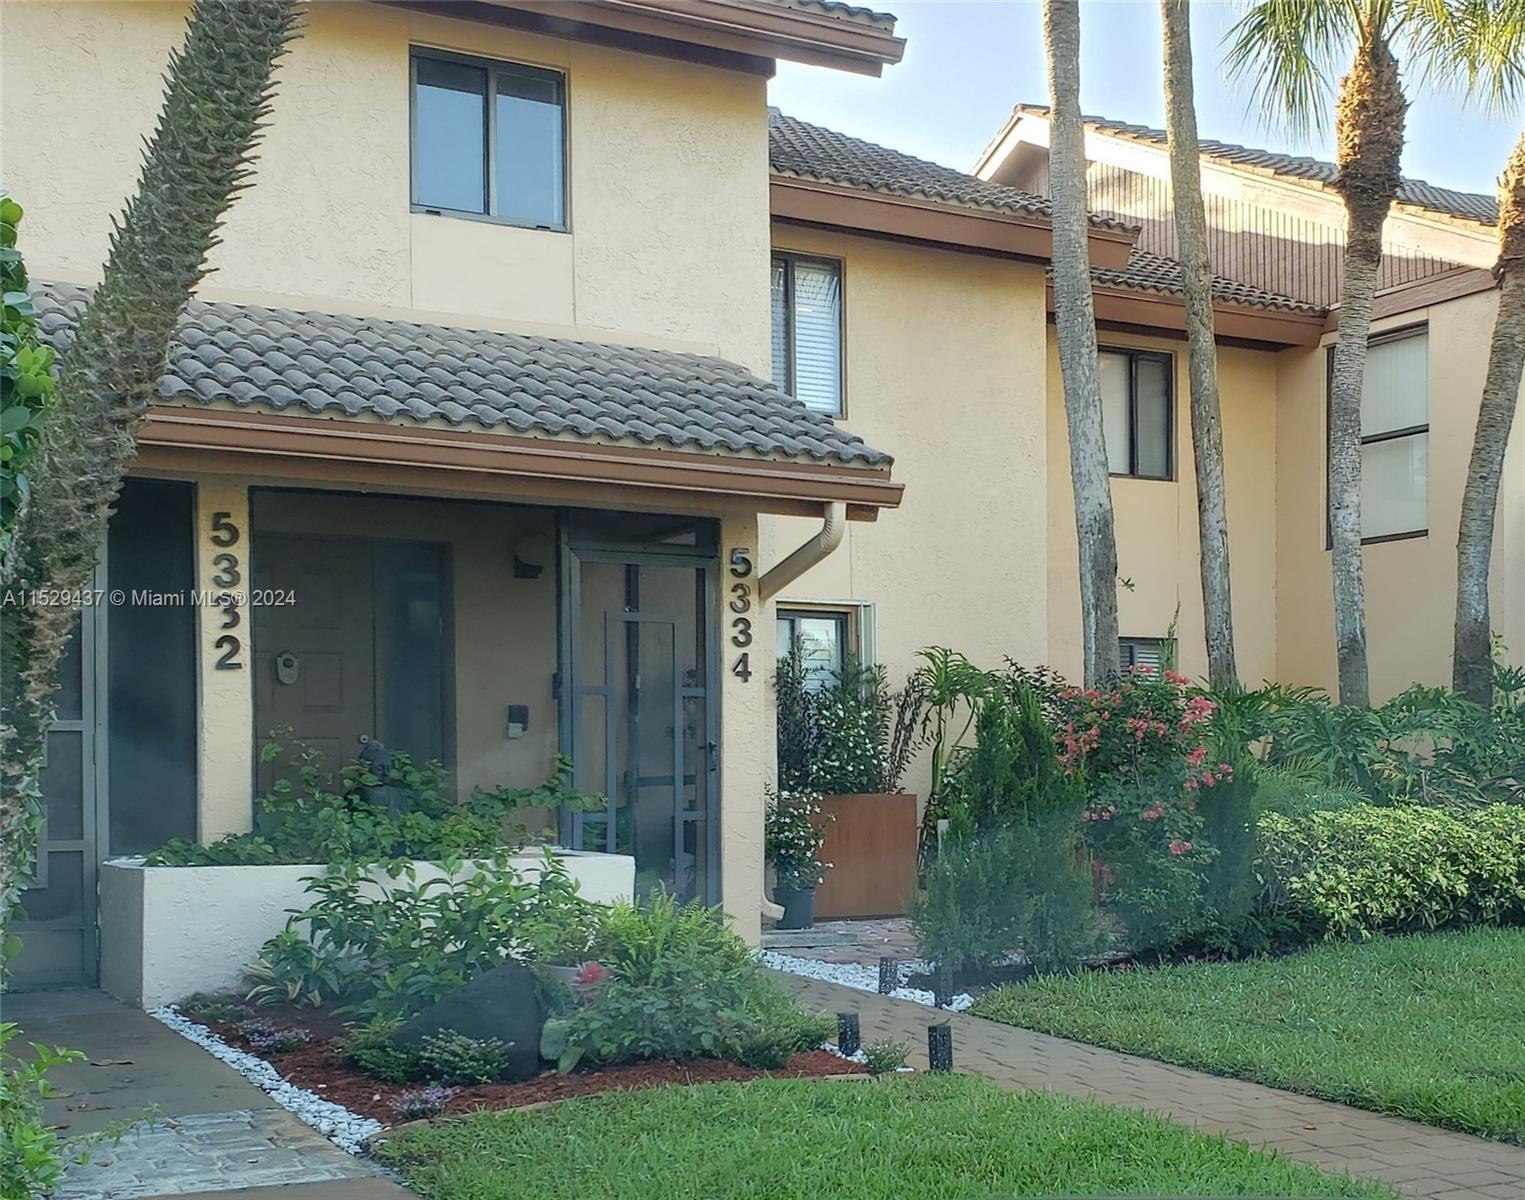 Unique 3 bedroom 2baths, large enclosed balcony overlooking golf course, large beautiful kitchen, 2 